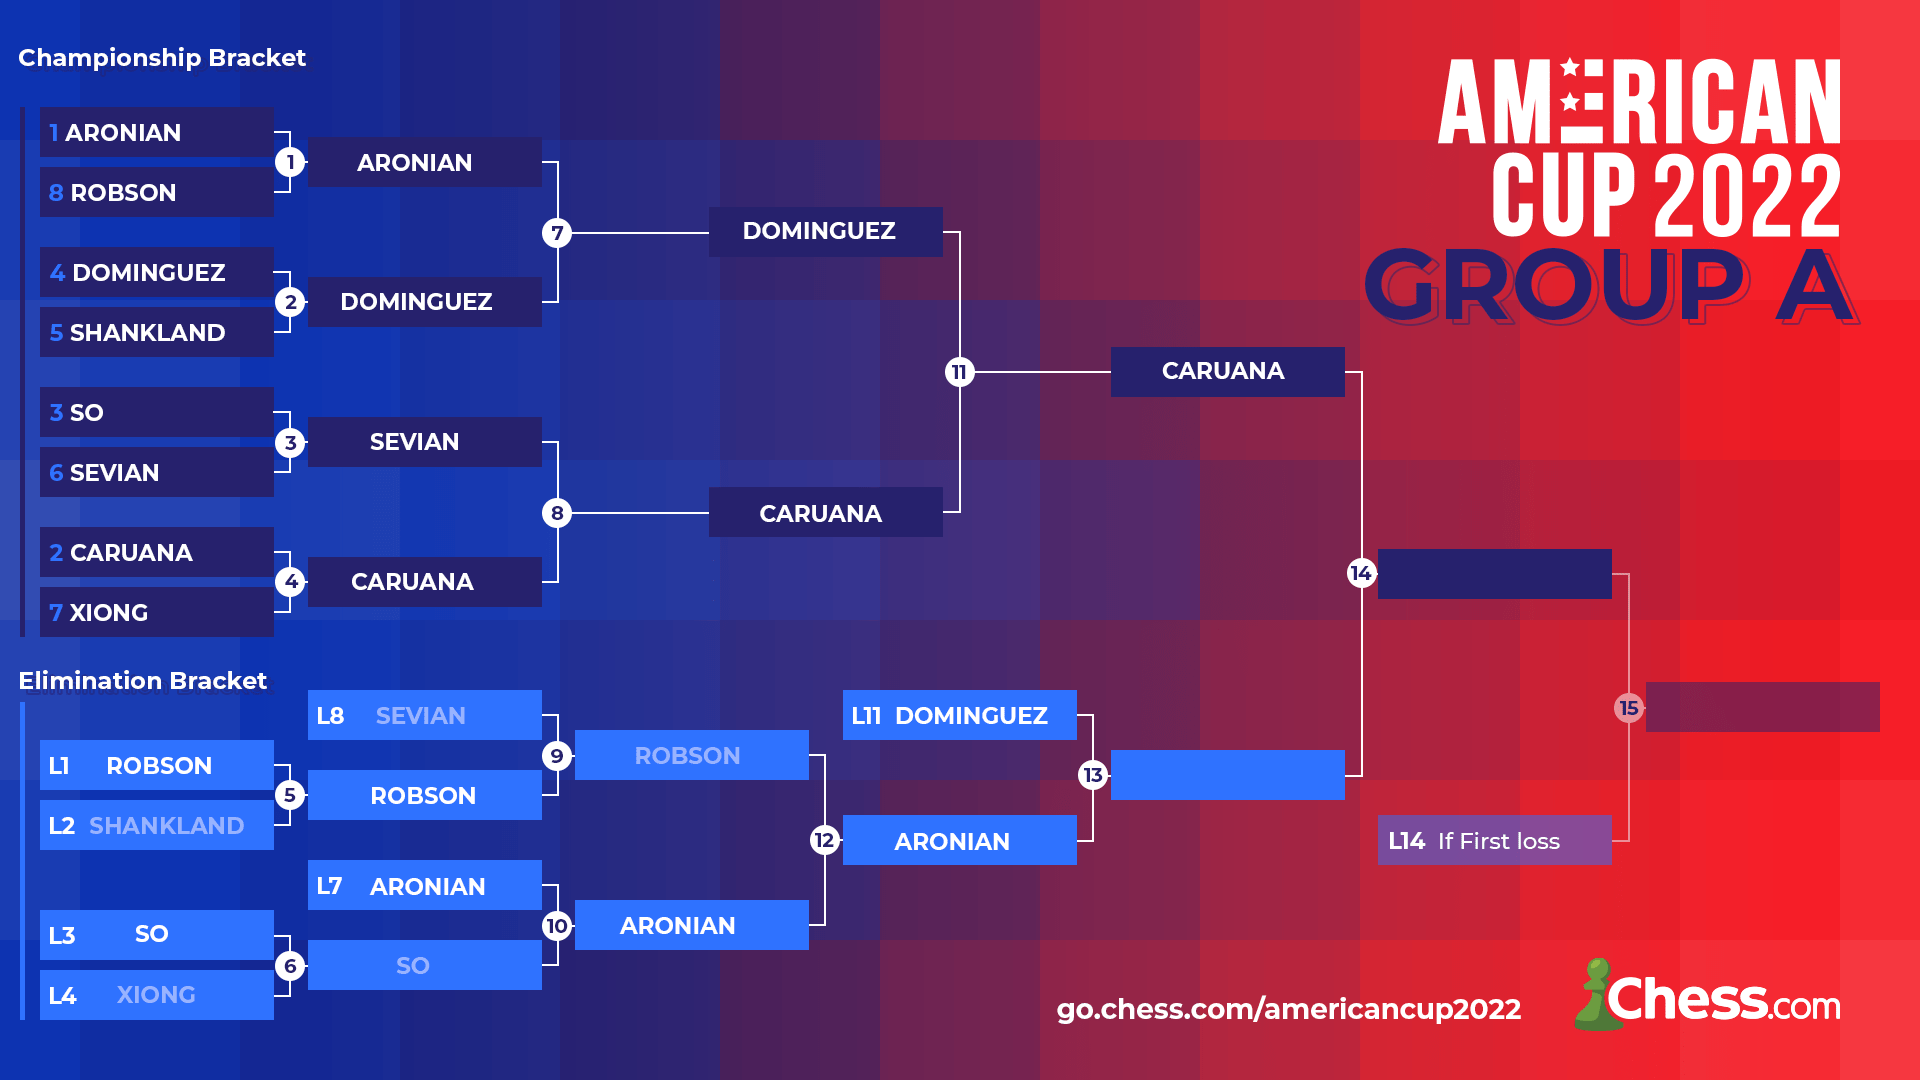 American Cup Group A Bracket